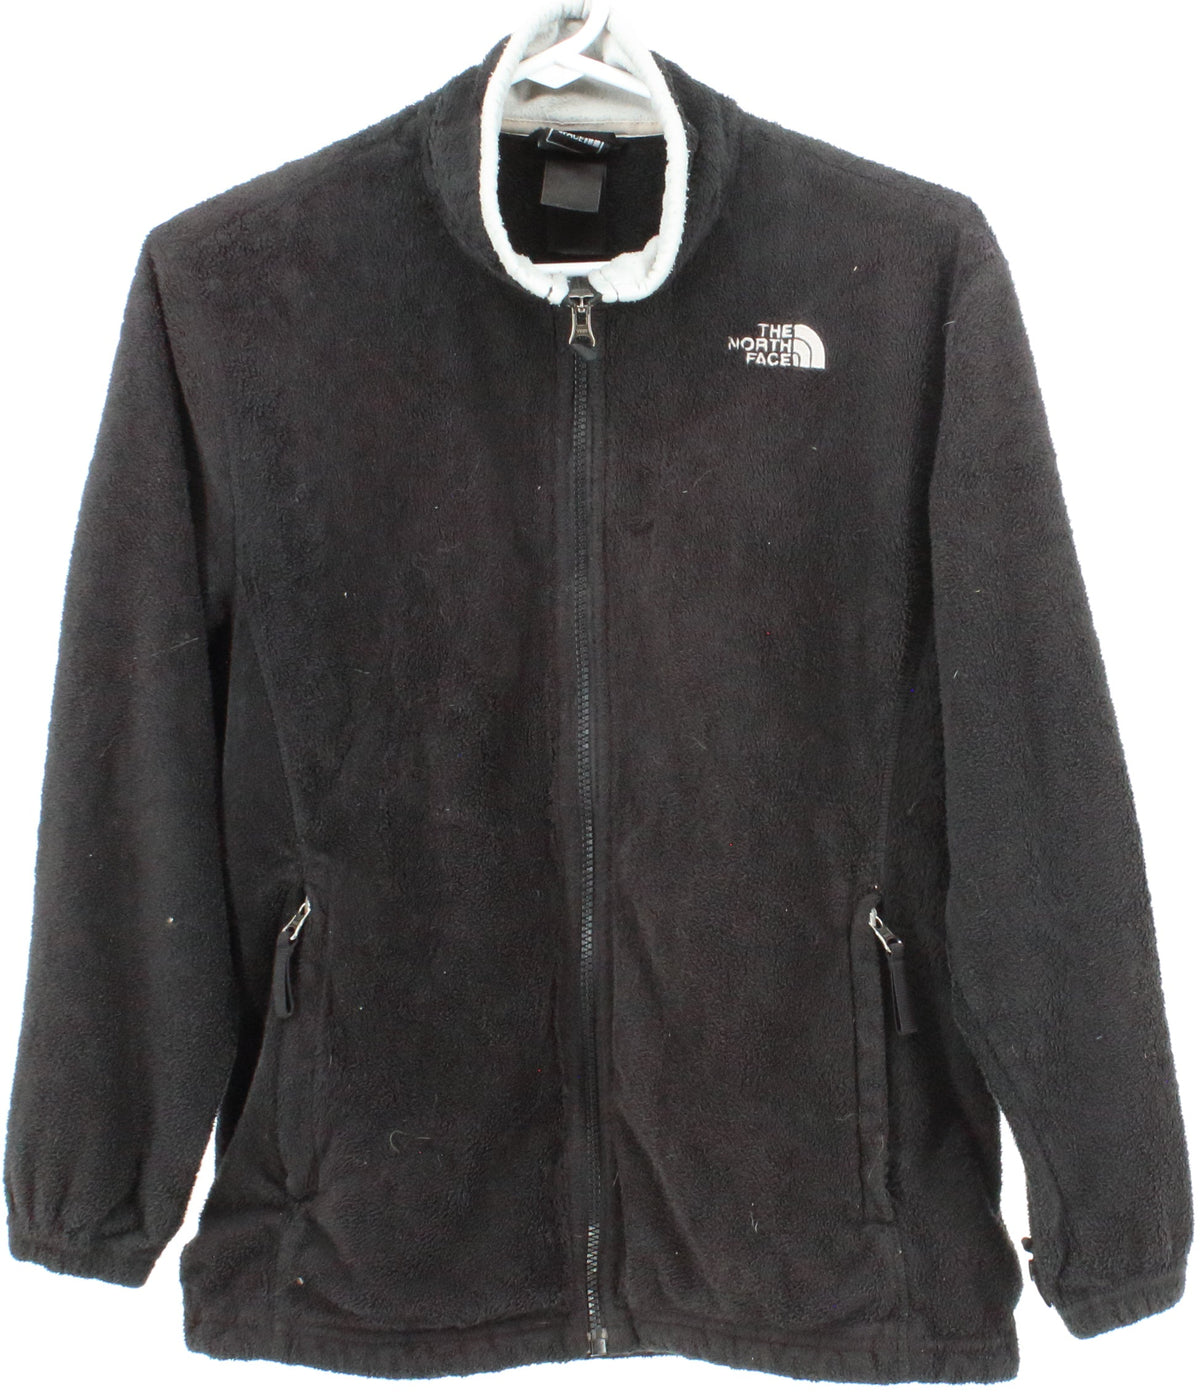 The North Face Girl's Black With Grey Detail Fleece